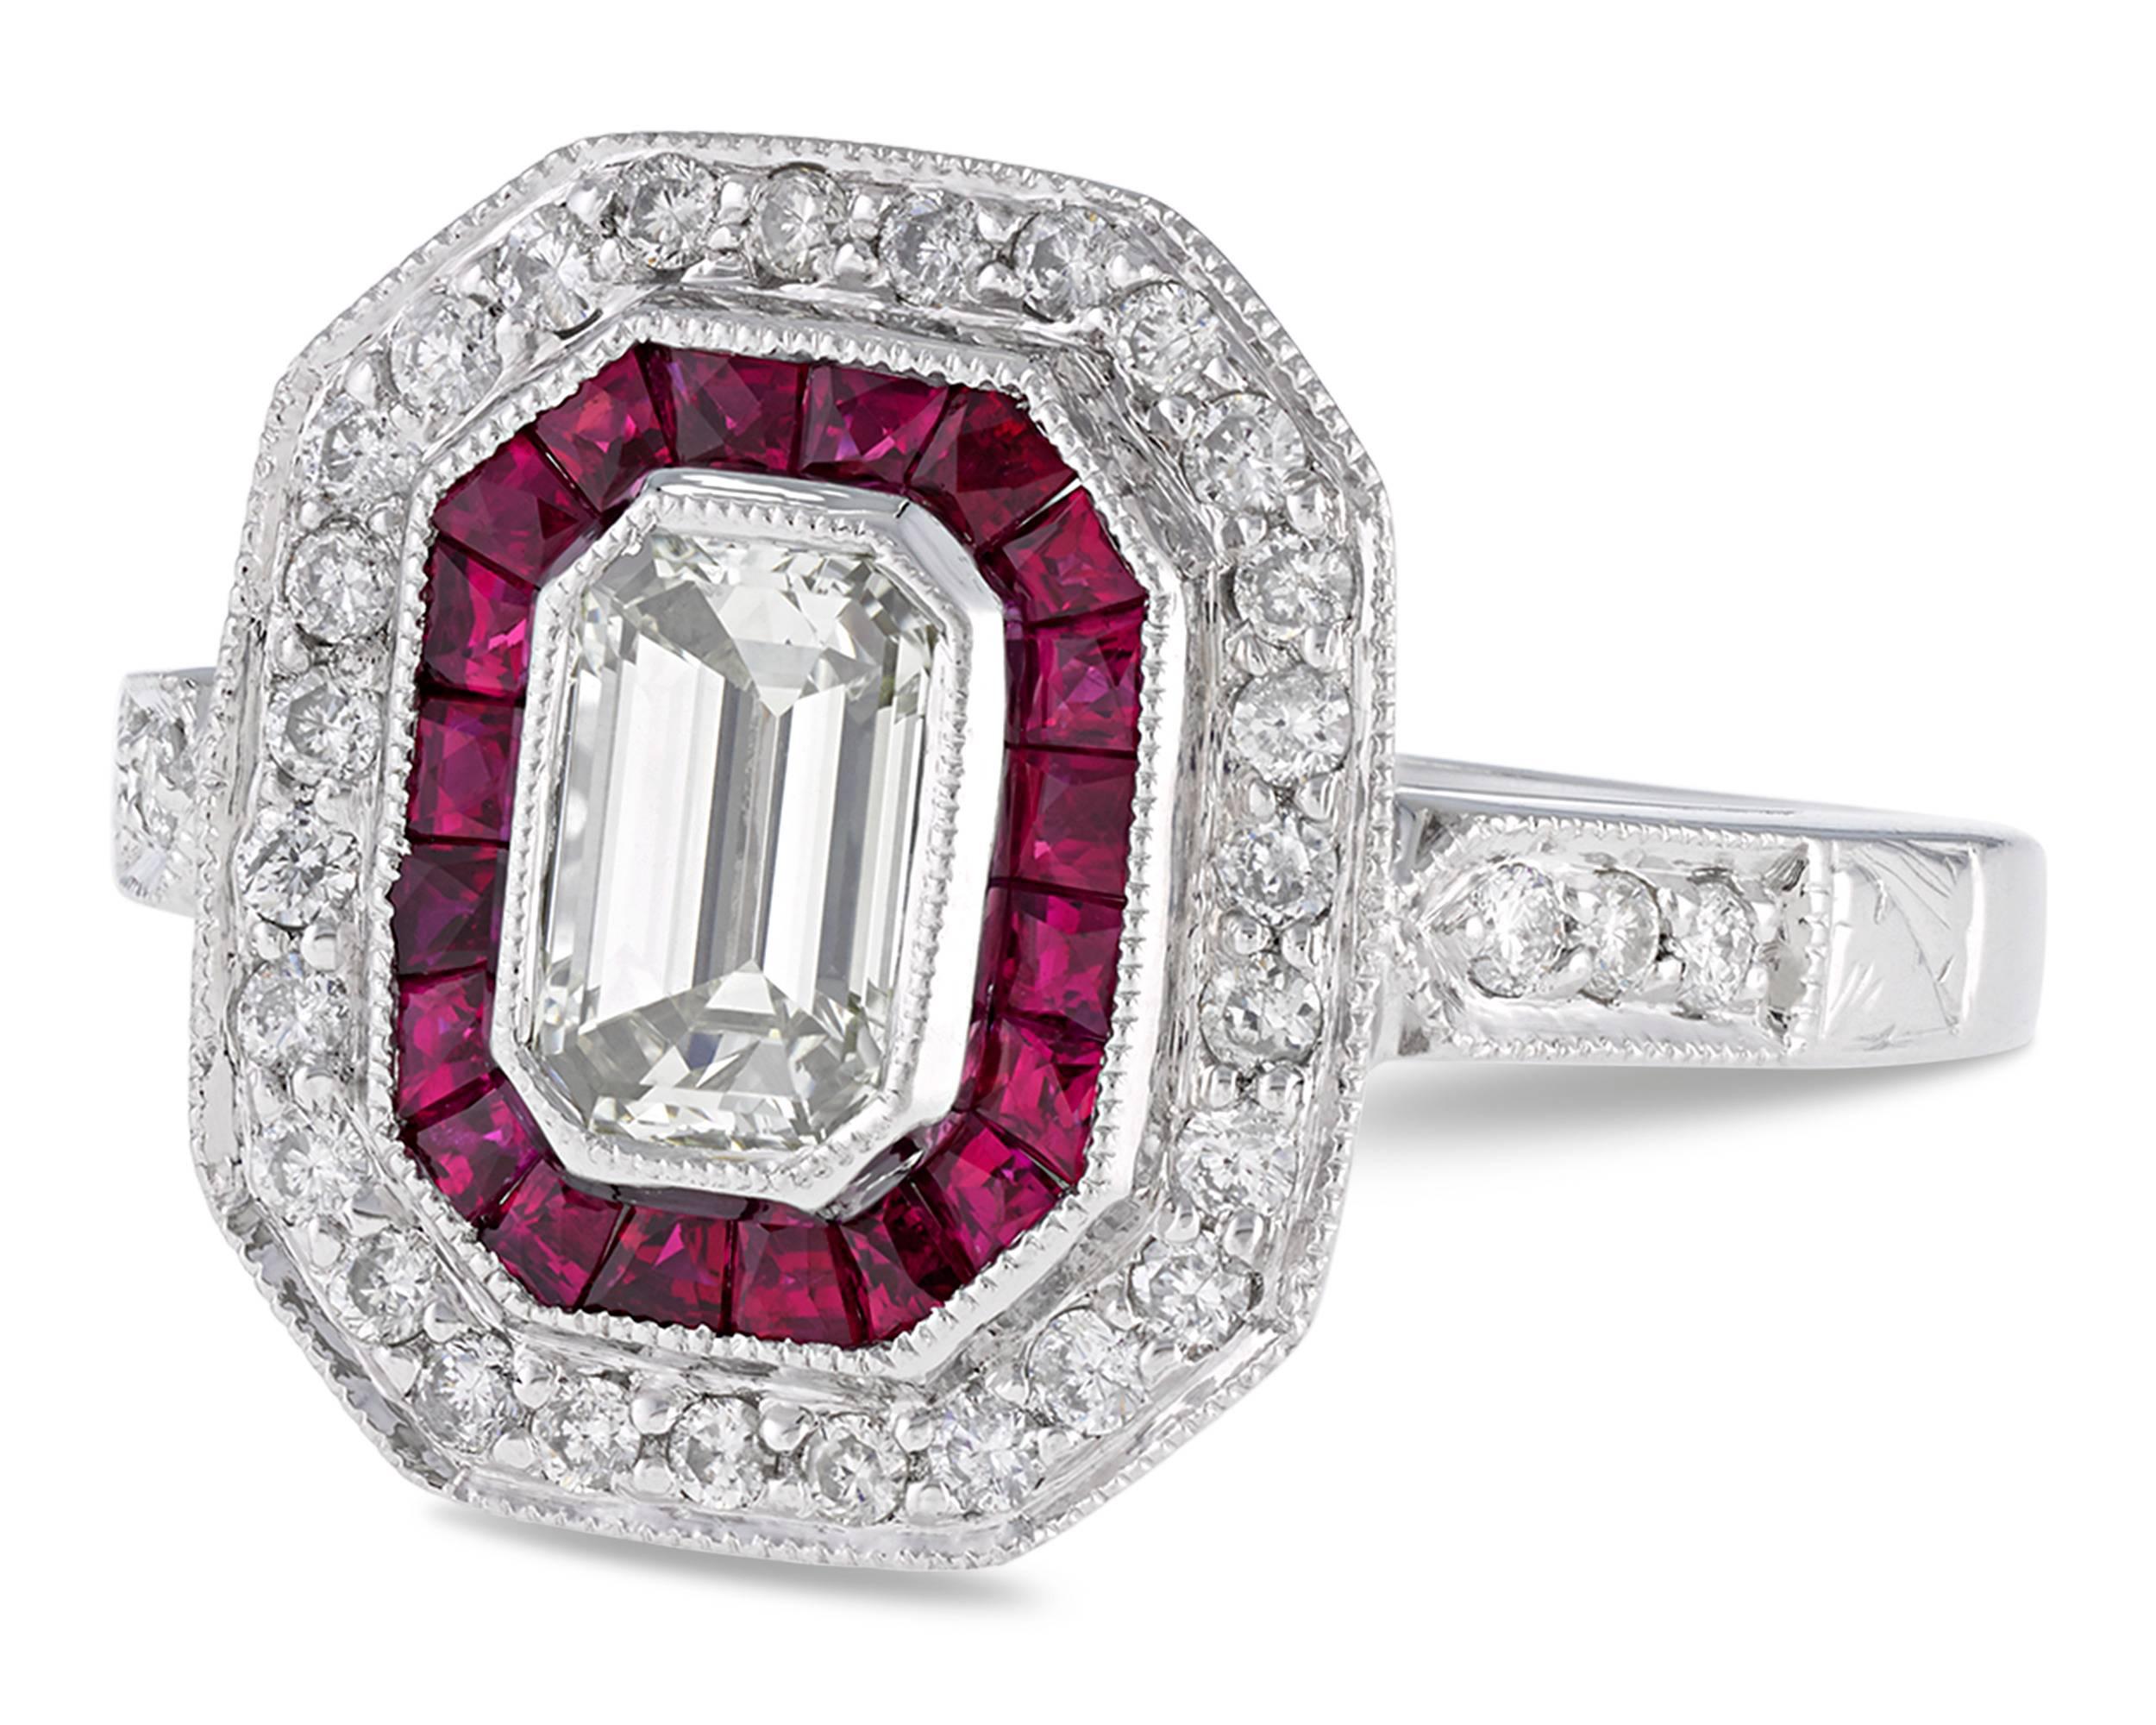 Geometric design and bold, contrasting color define this Art Deco-style diamond and ruby ring. A brilliant 1.21-carat emerald-cut diamond glistens in its center, surrounded by 0.60 total carat of dramatic crimson rubies and 0.35 total carat of